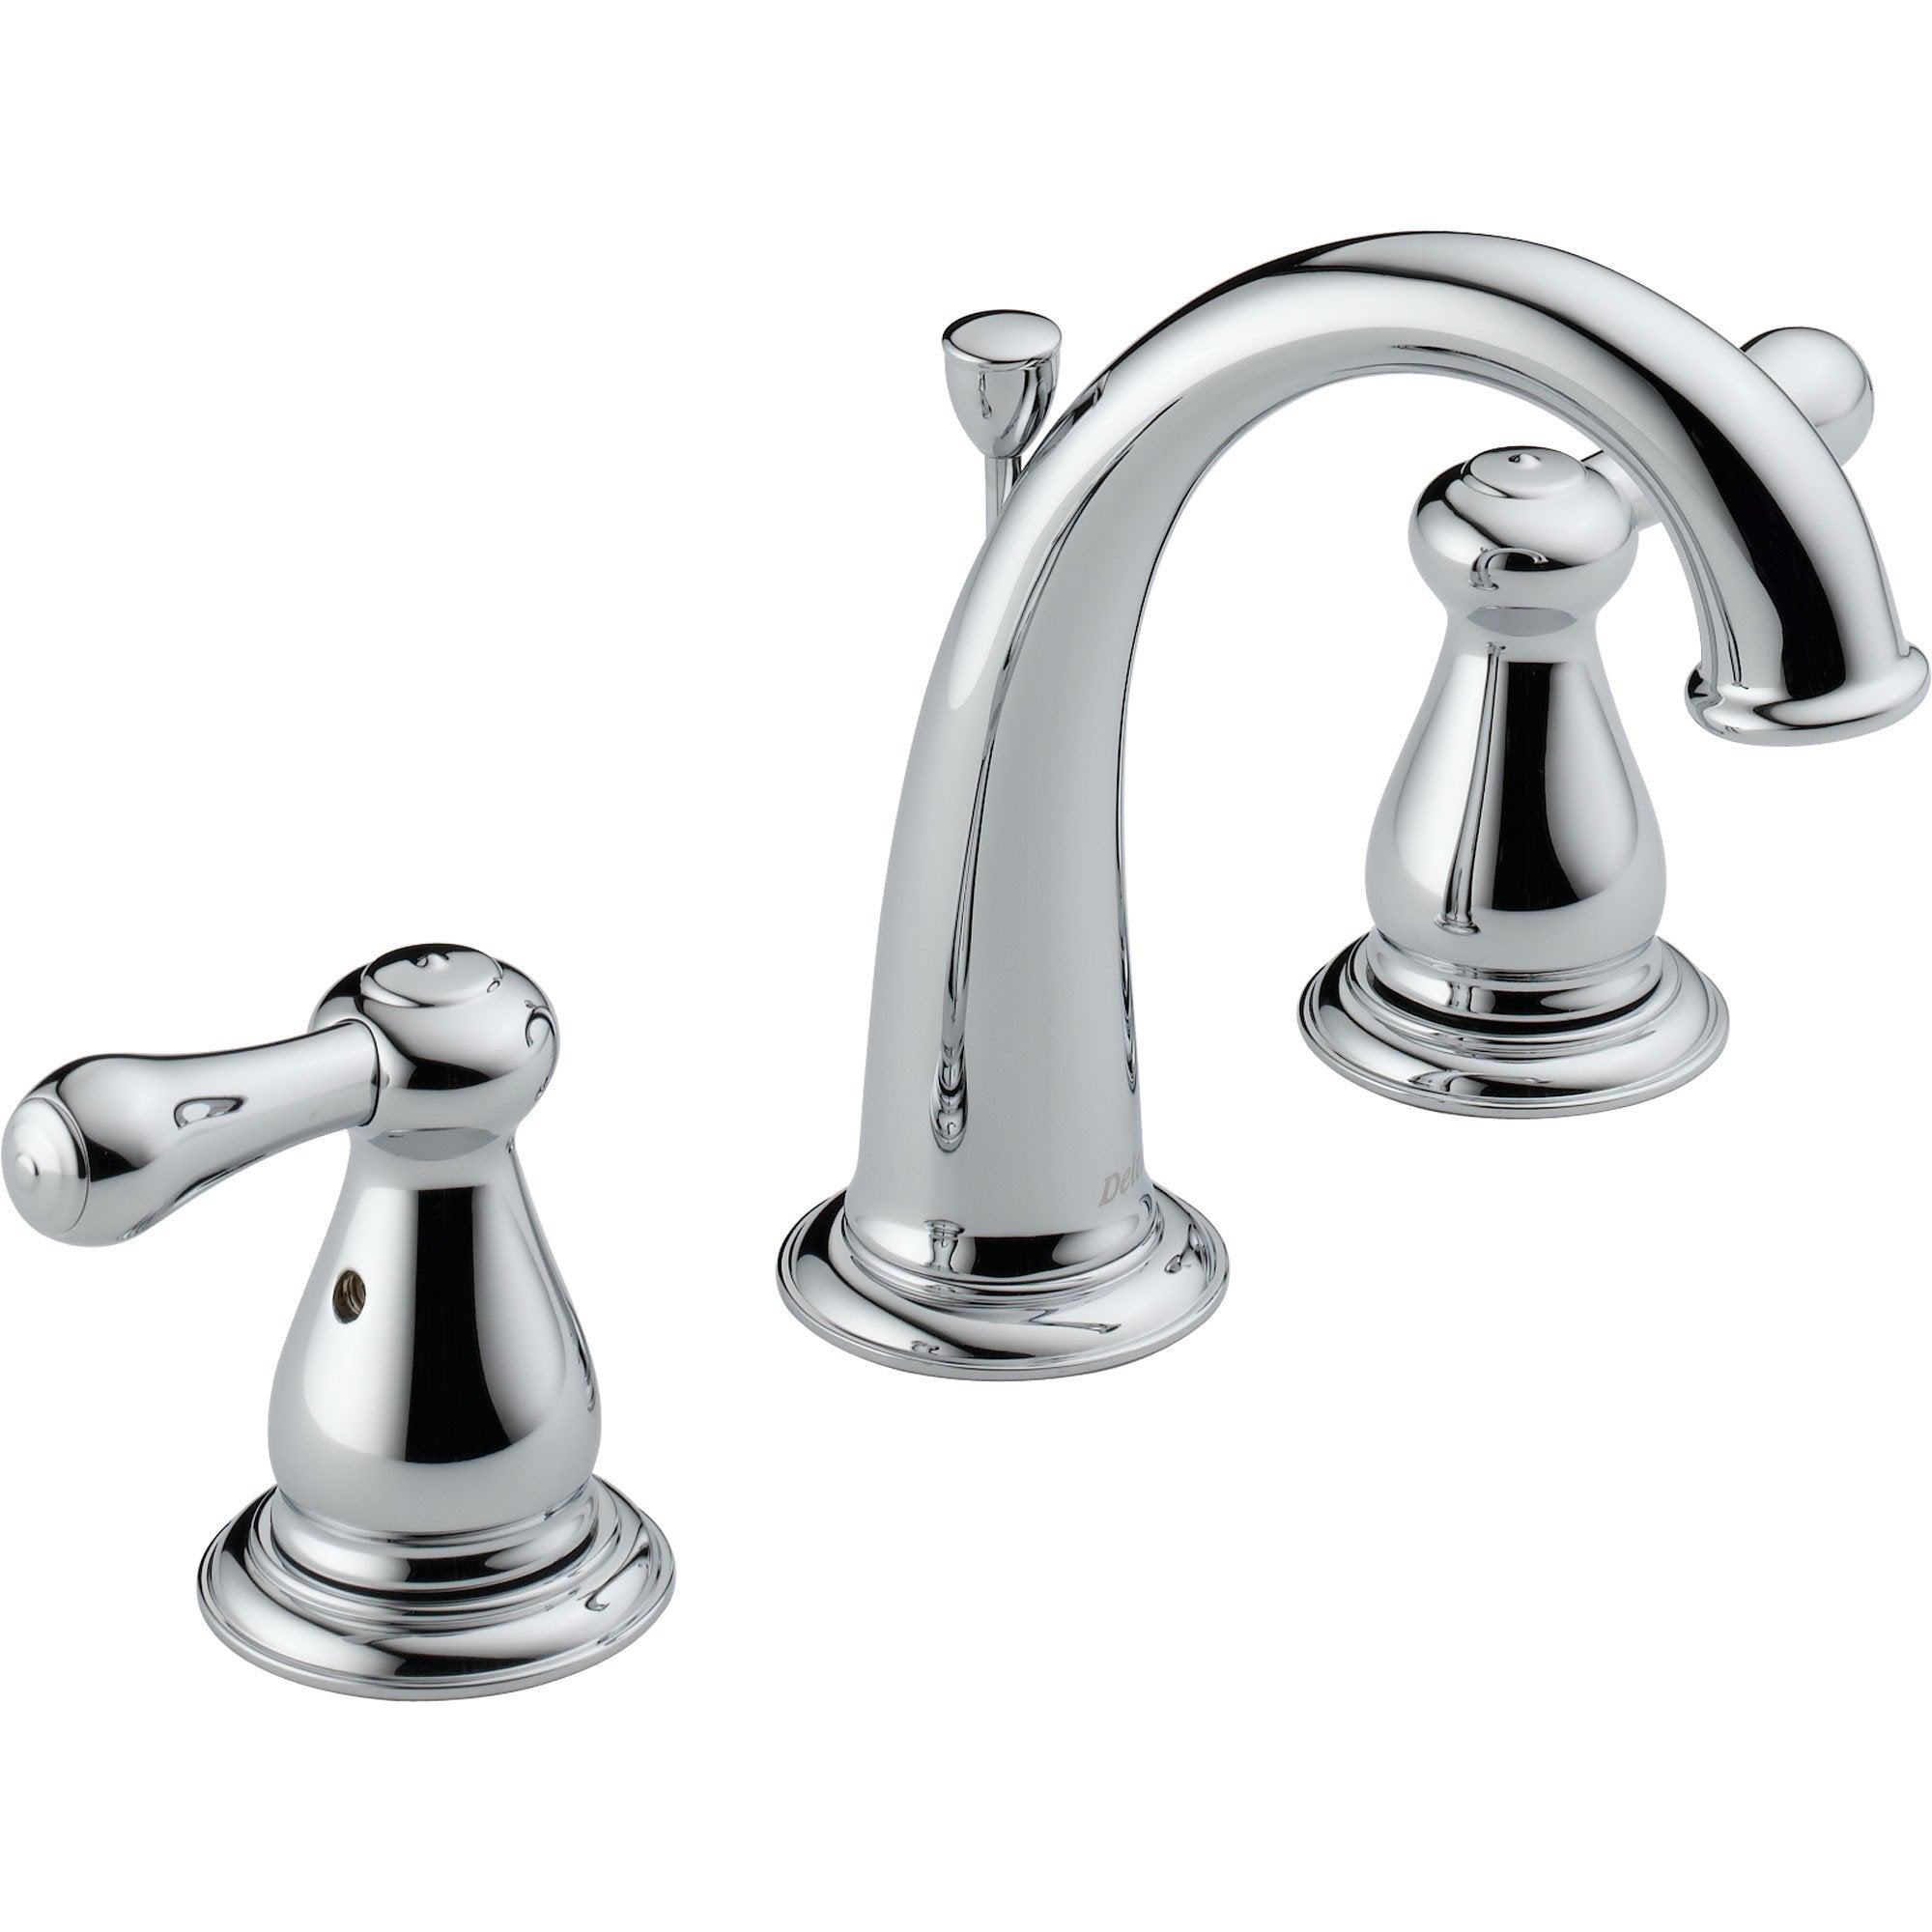 Delta Leland 8 in. Widespread 2-Handle High Arc Bathroom Faucet in Chrome 572932